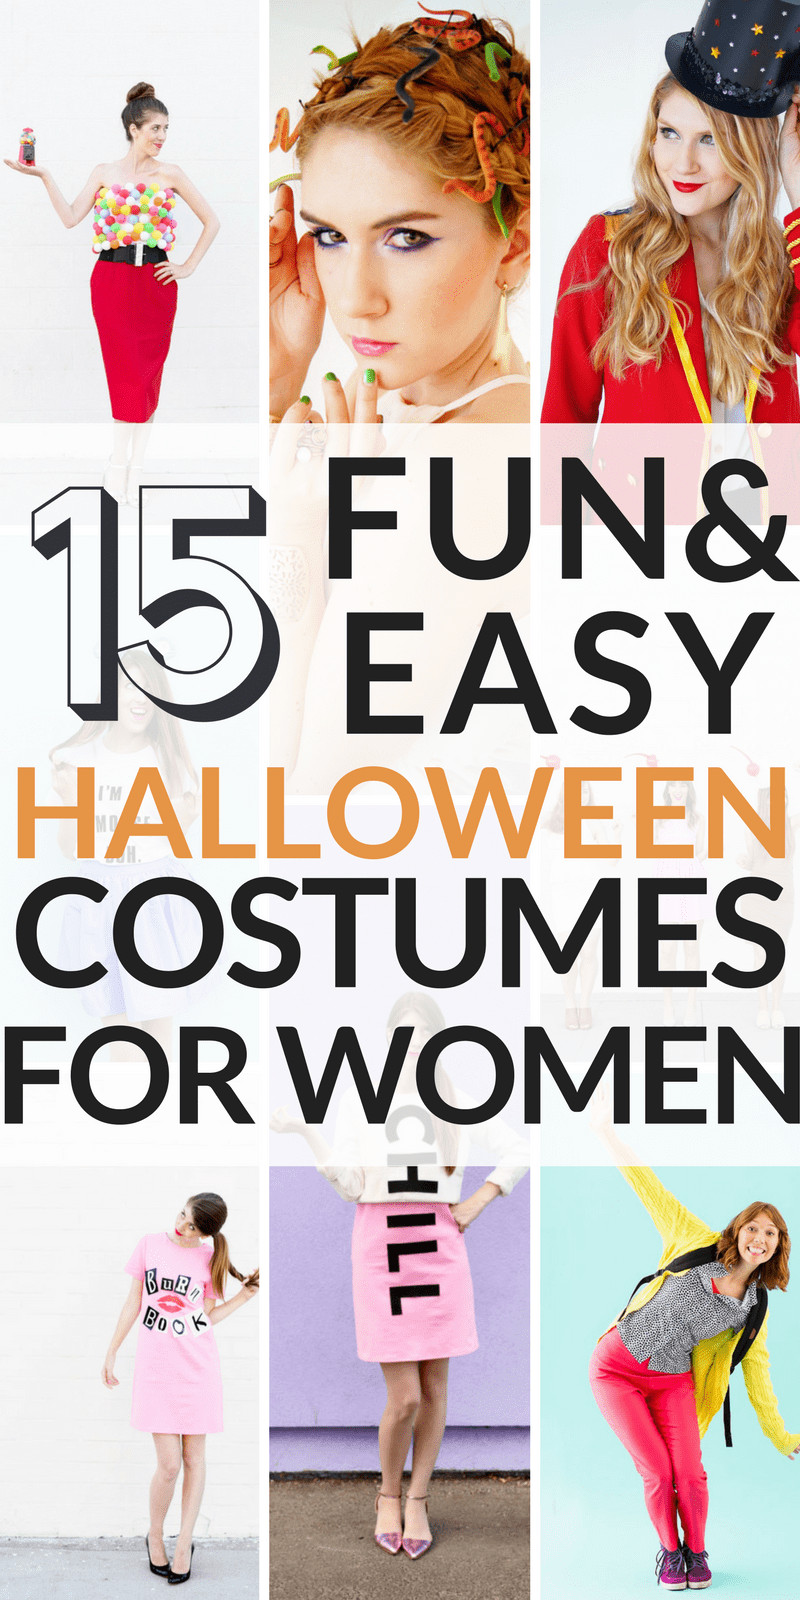 Cheap DIY Halloween Costumes For Adults
 15 Cheap and Easy DIY Halloween Costumes for Women